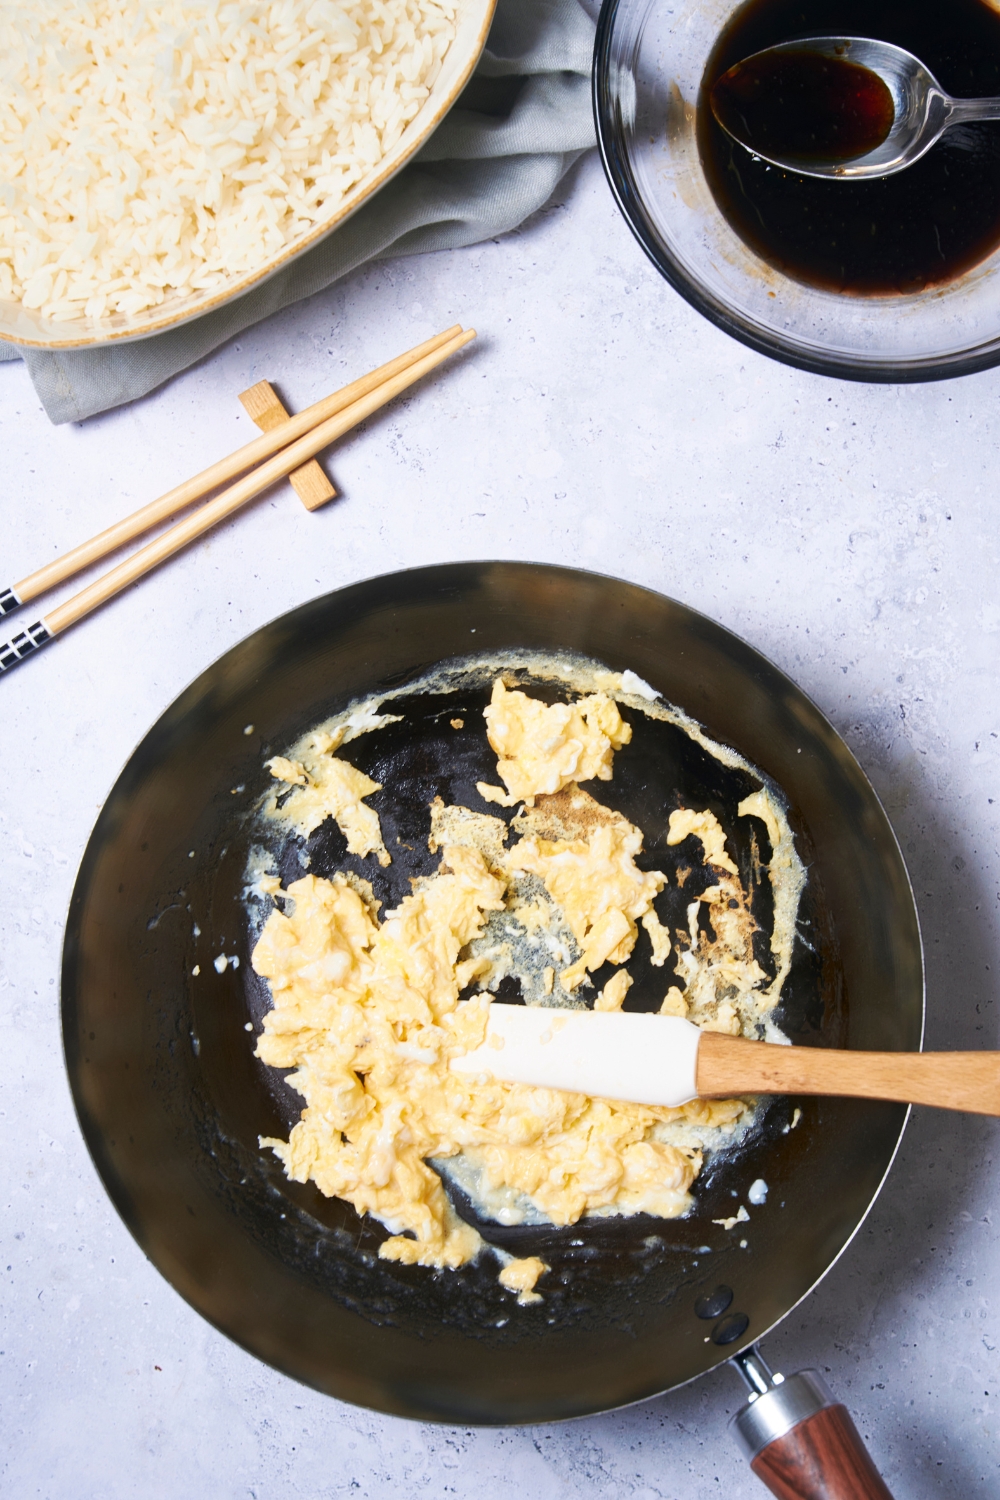 A black skillet with scrambled eggs and a plastic spatula in the skillet. Next to the skillet is a pair of chopsticks, a bowl of white rice and a bowl of a brown sauce mixture with a spoon in the bowl.